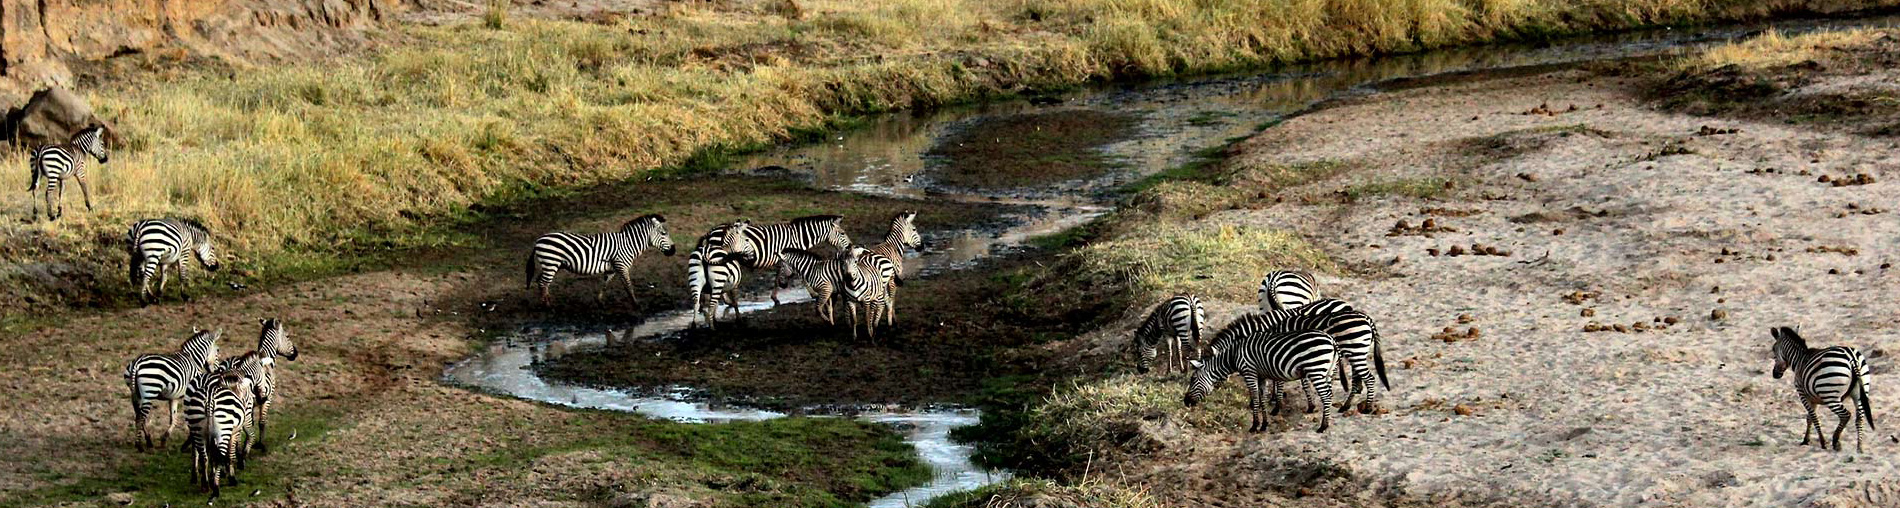 Affordable Holiday Tour Packages to Tanzania